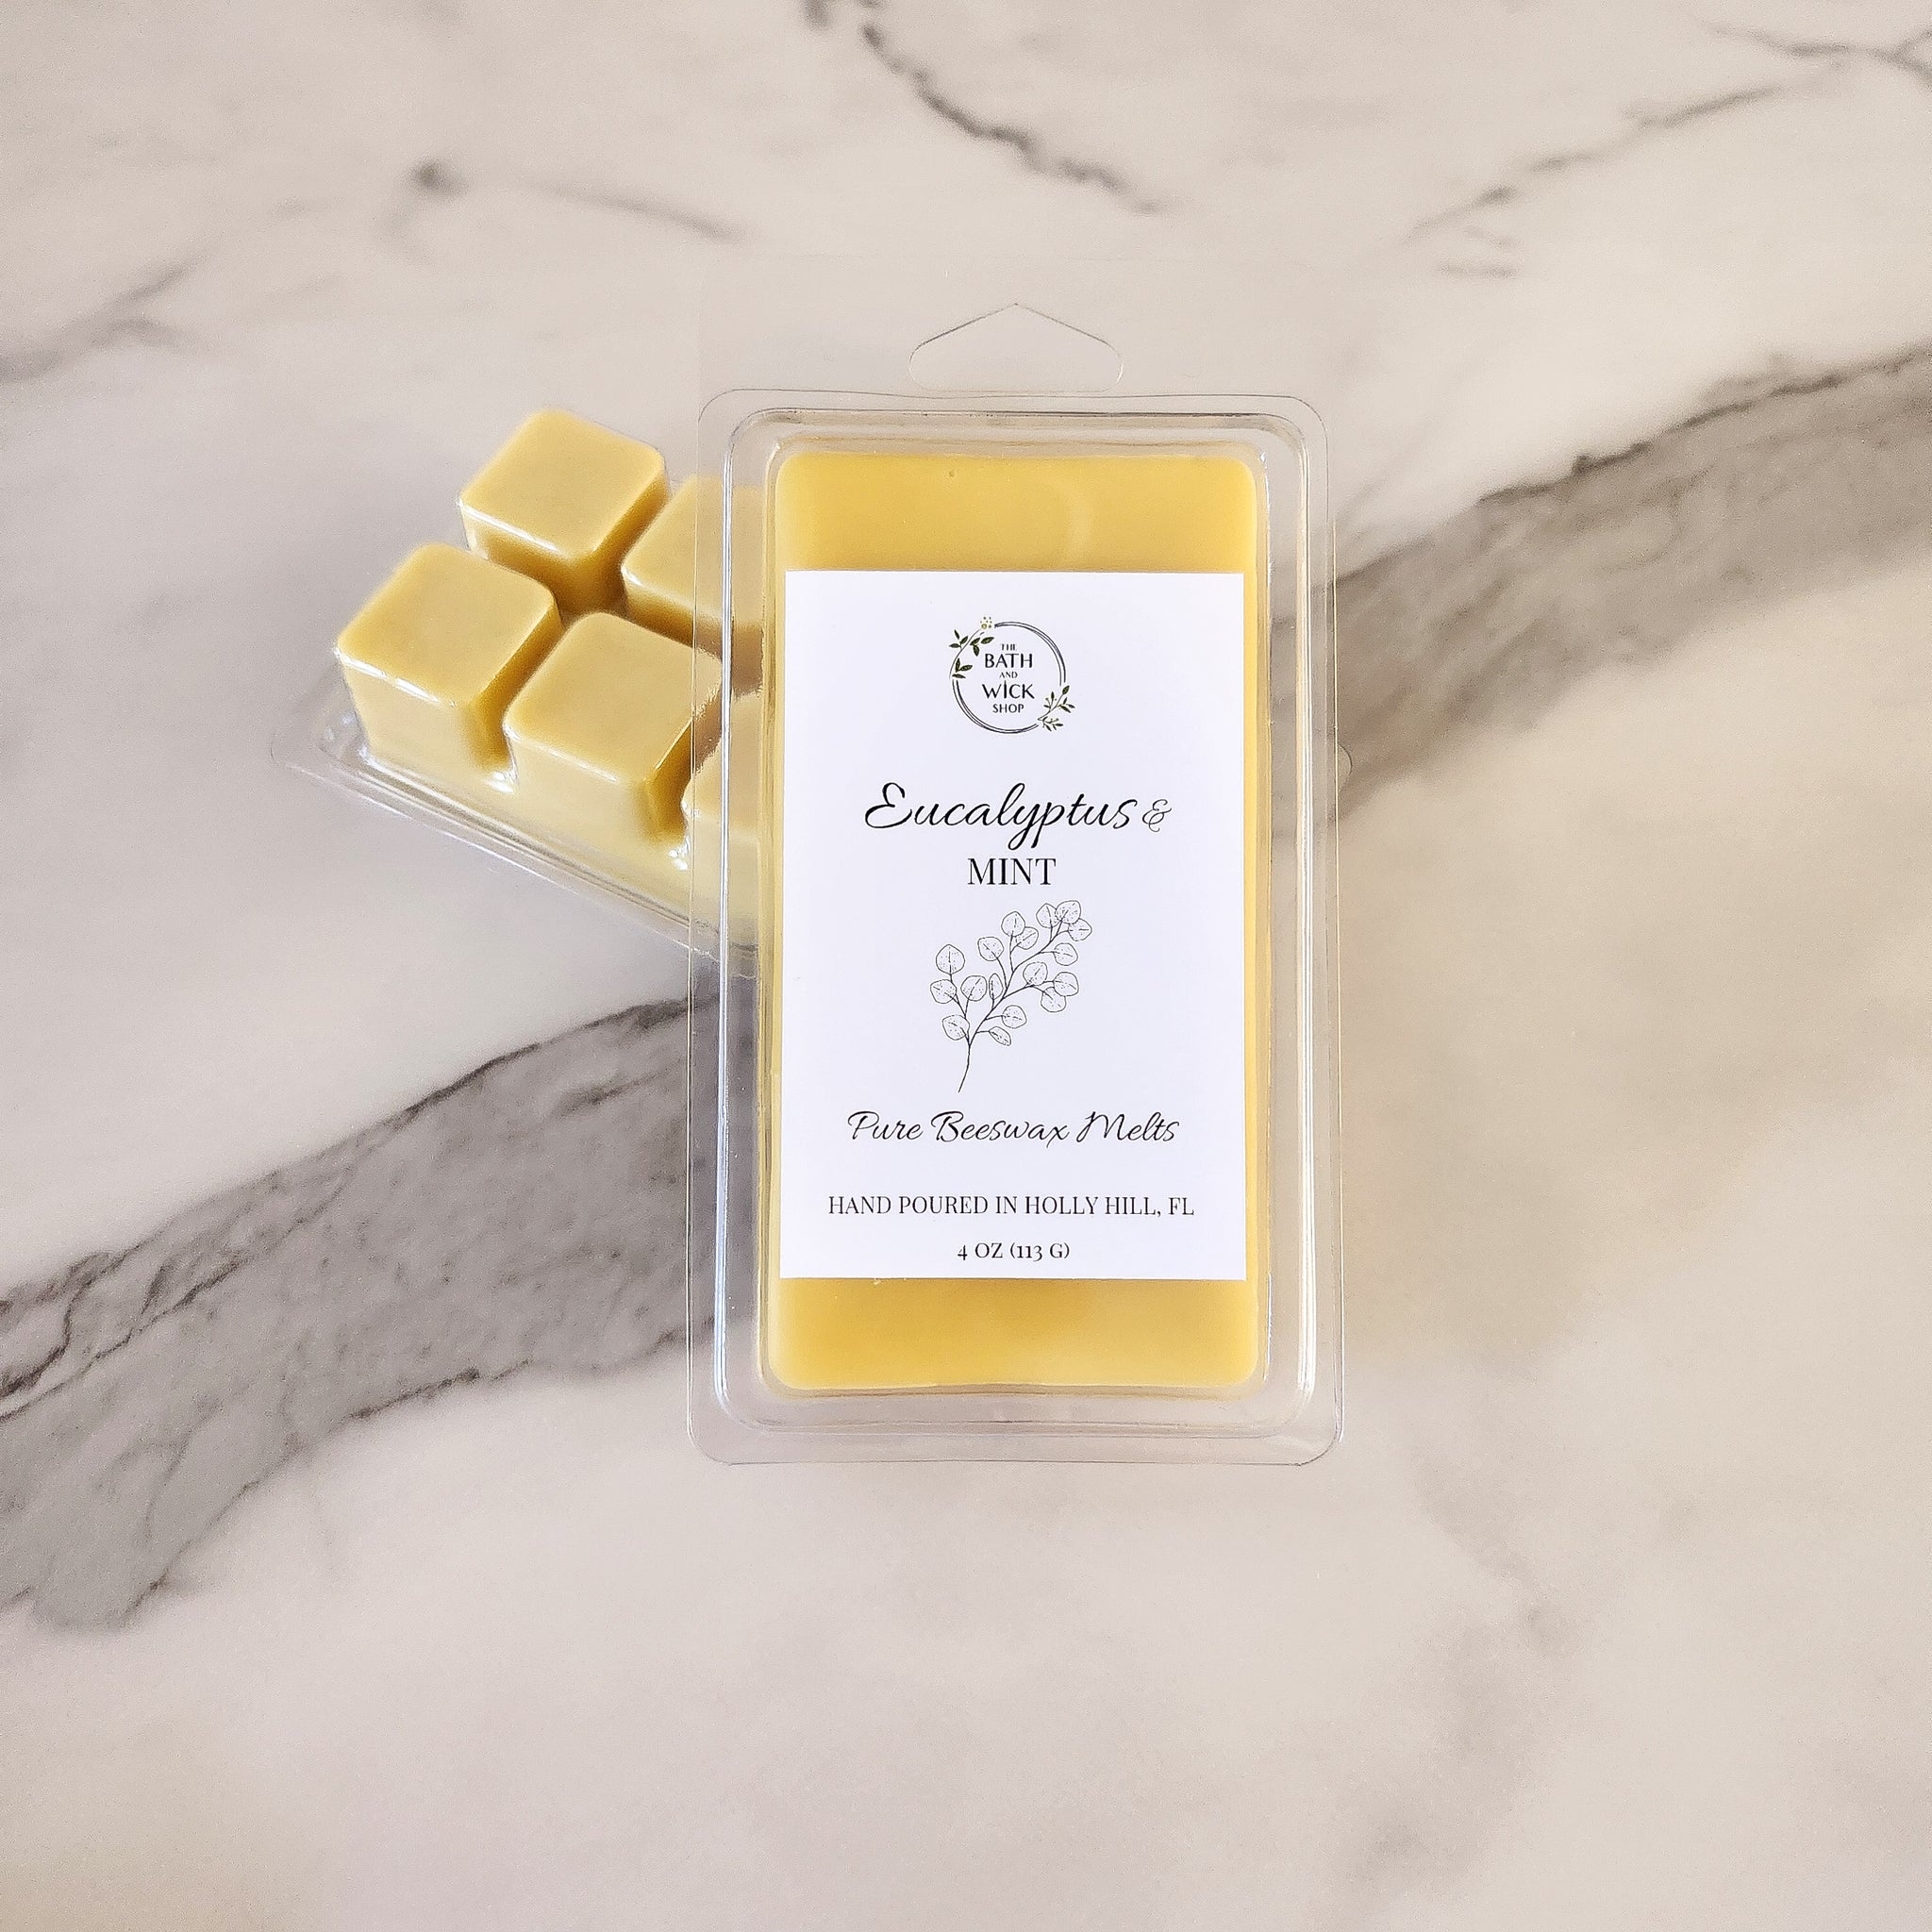 Eucalyptus & Mint Pure Beeswax Melts | Large 8 Cube